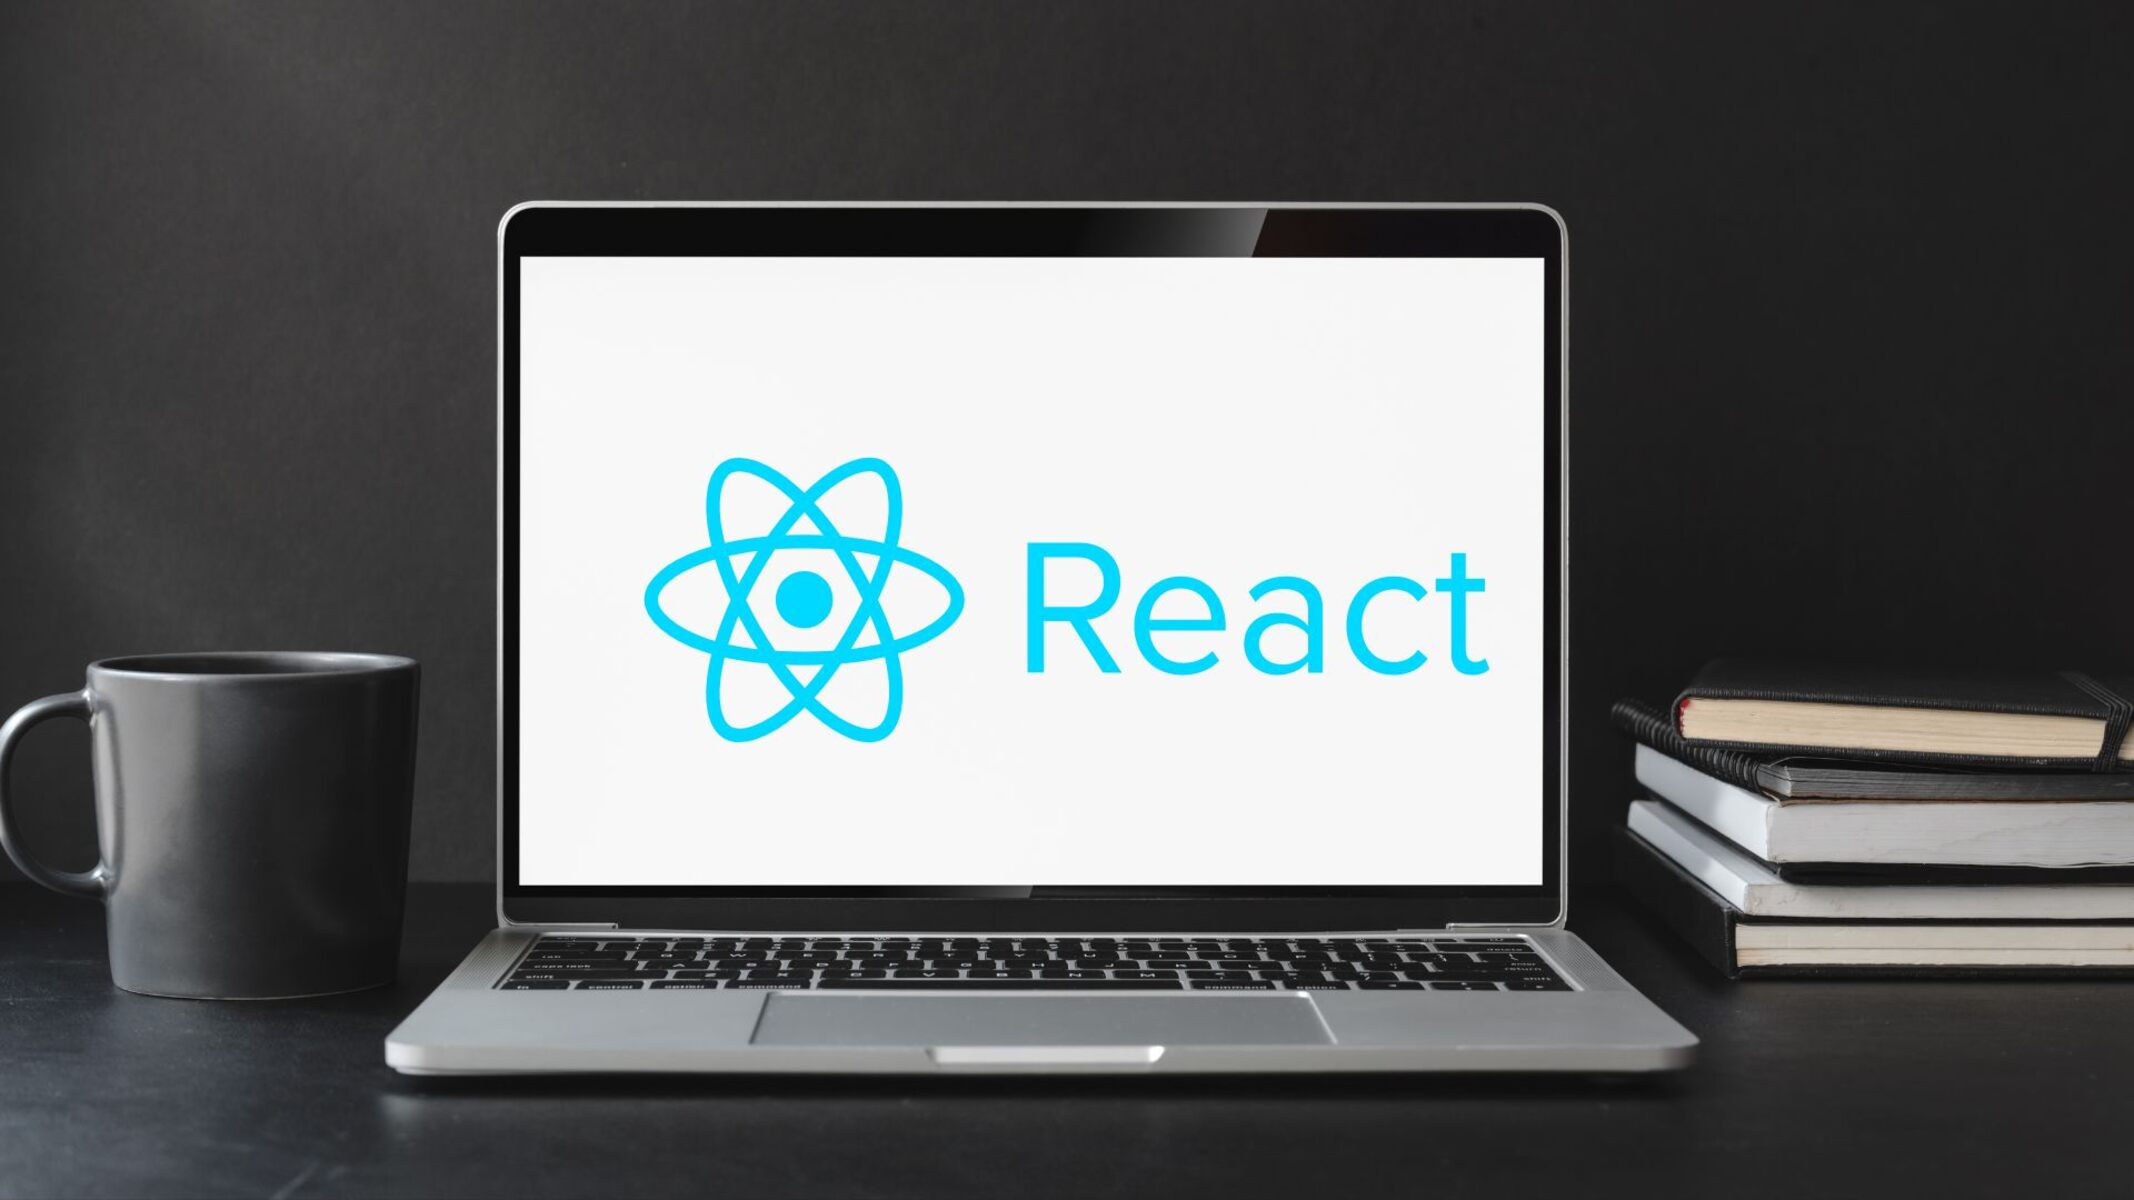 How To View React App In Browser